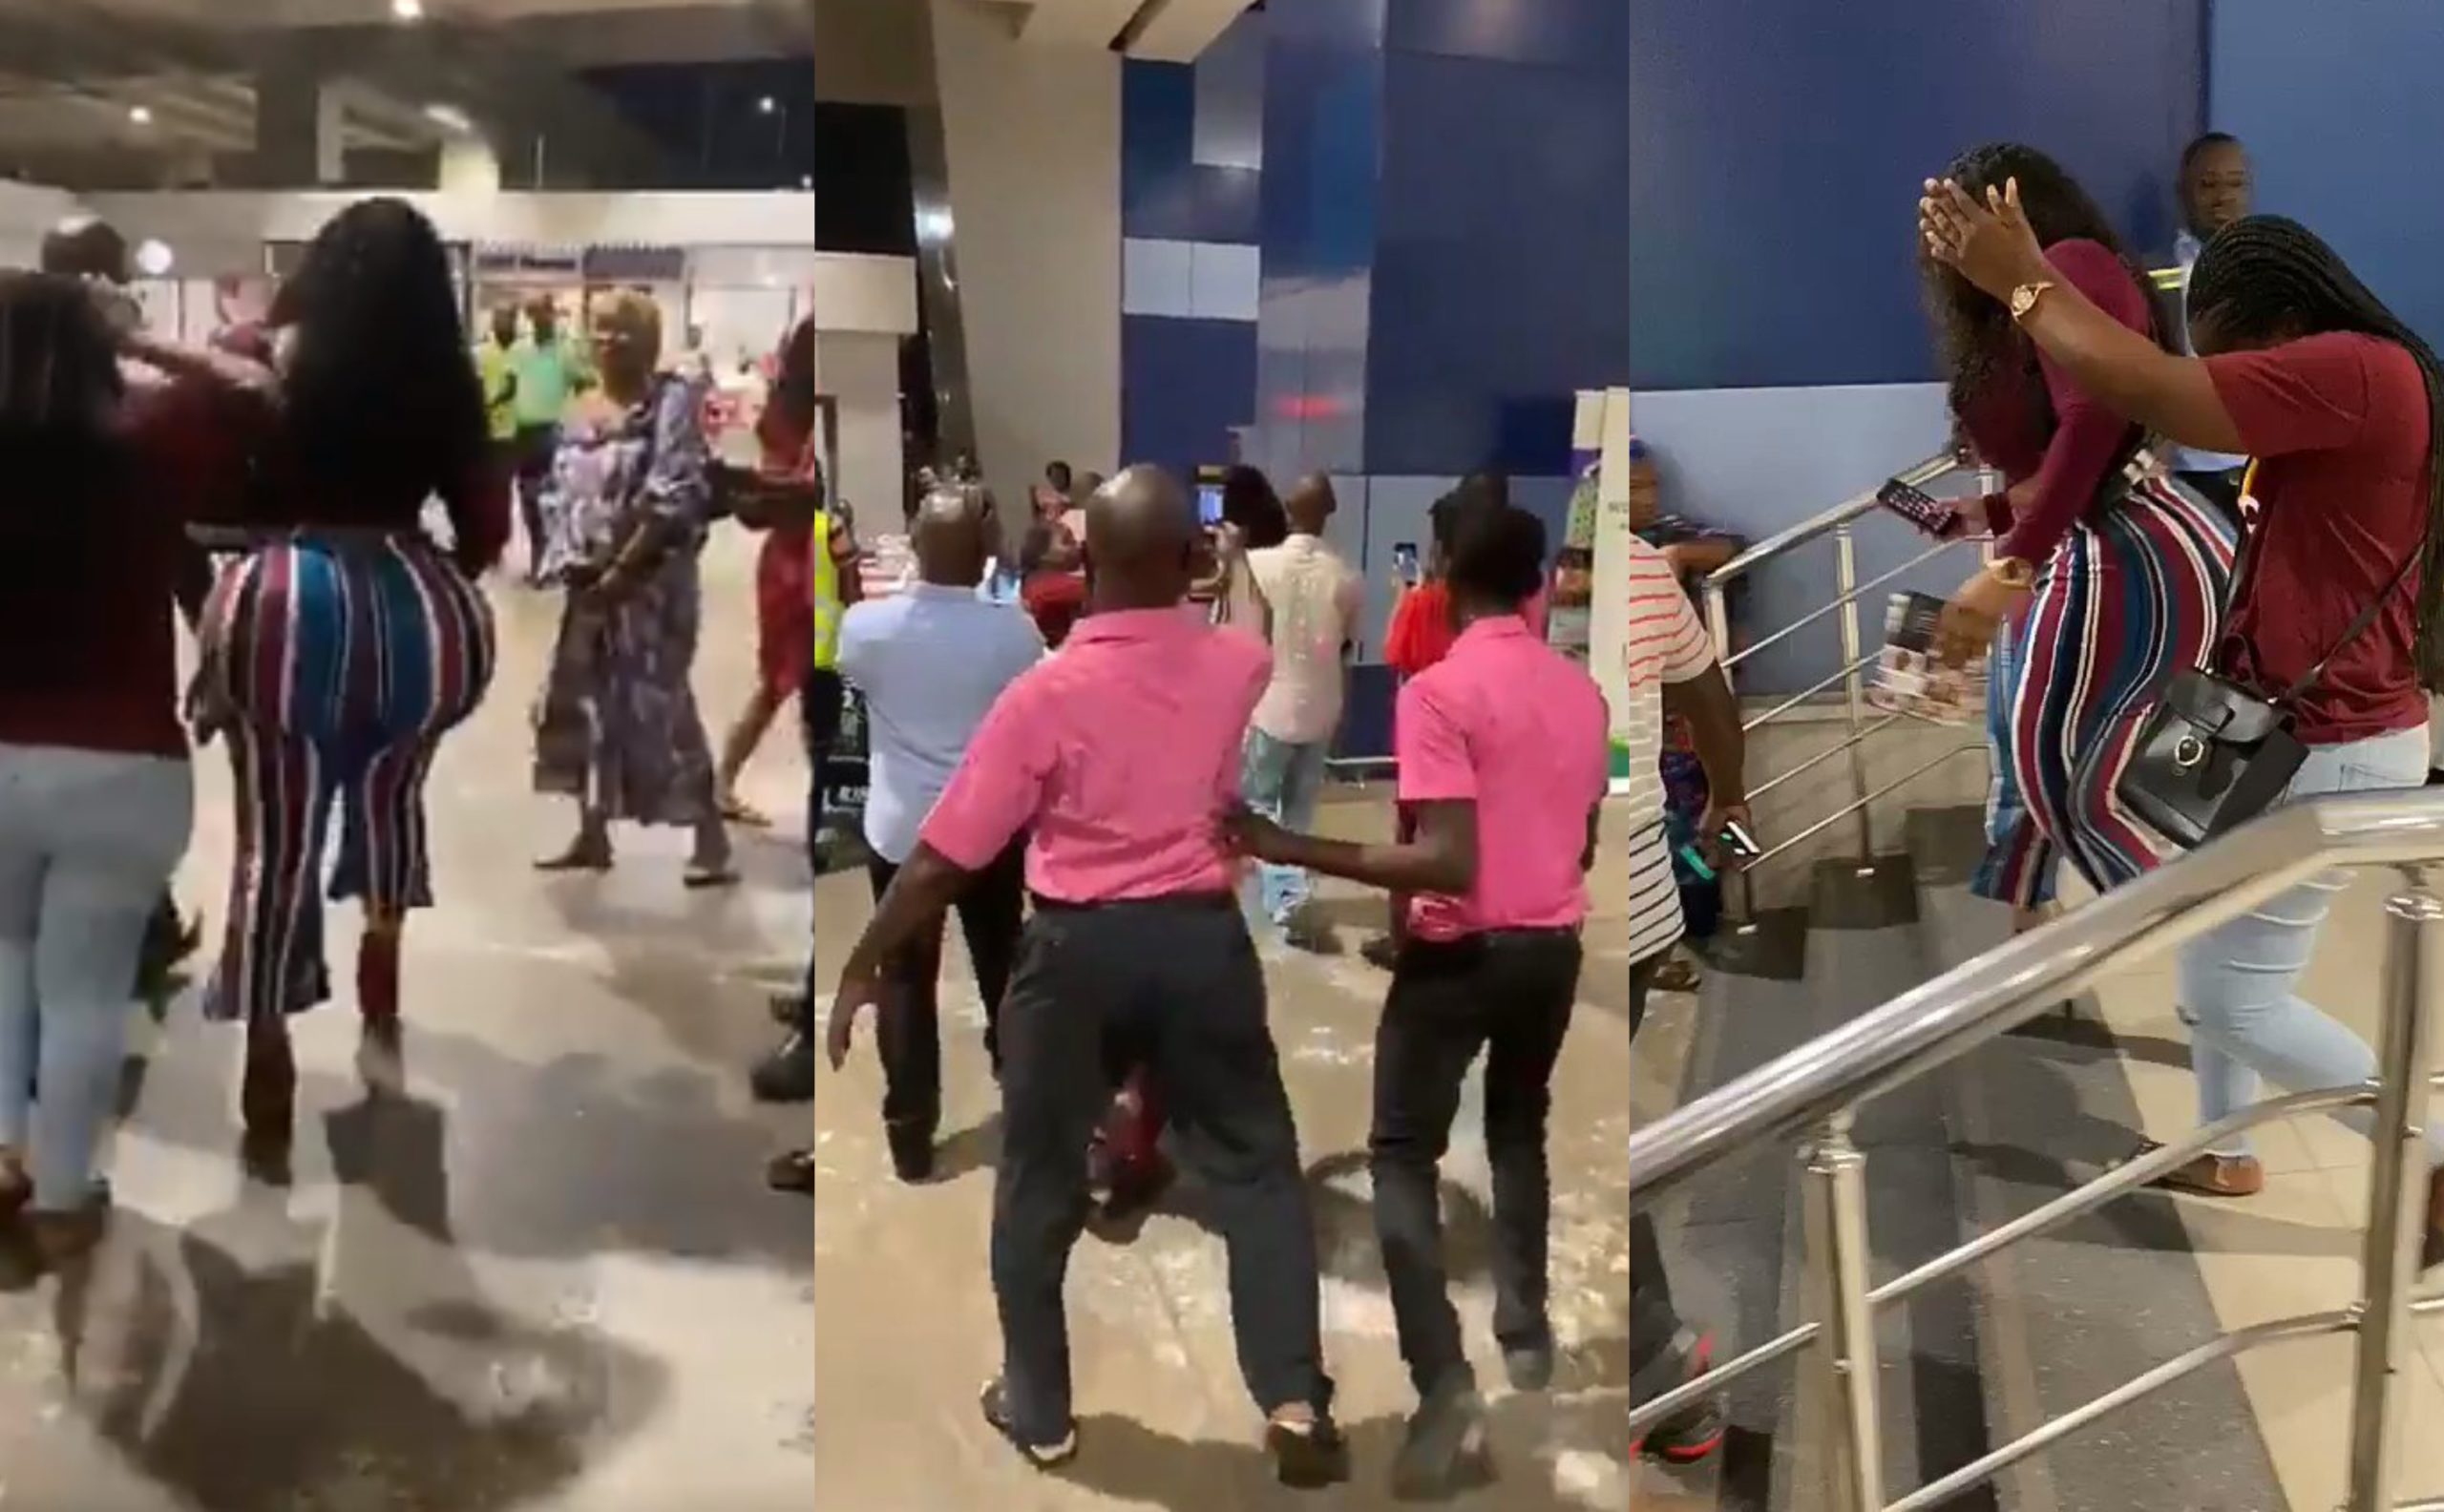 Lady with gigantic backside causes commotion at the airport (Video)